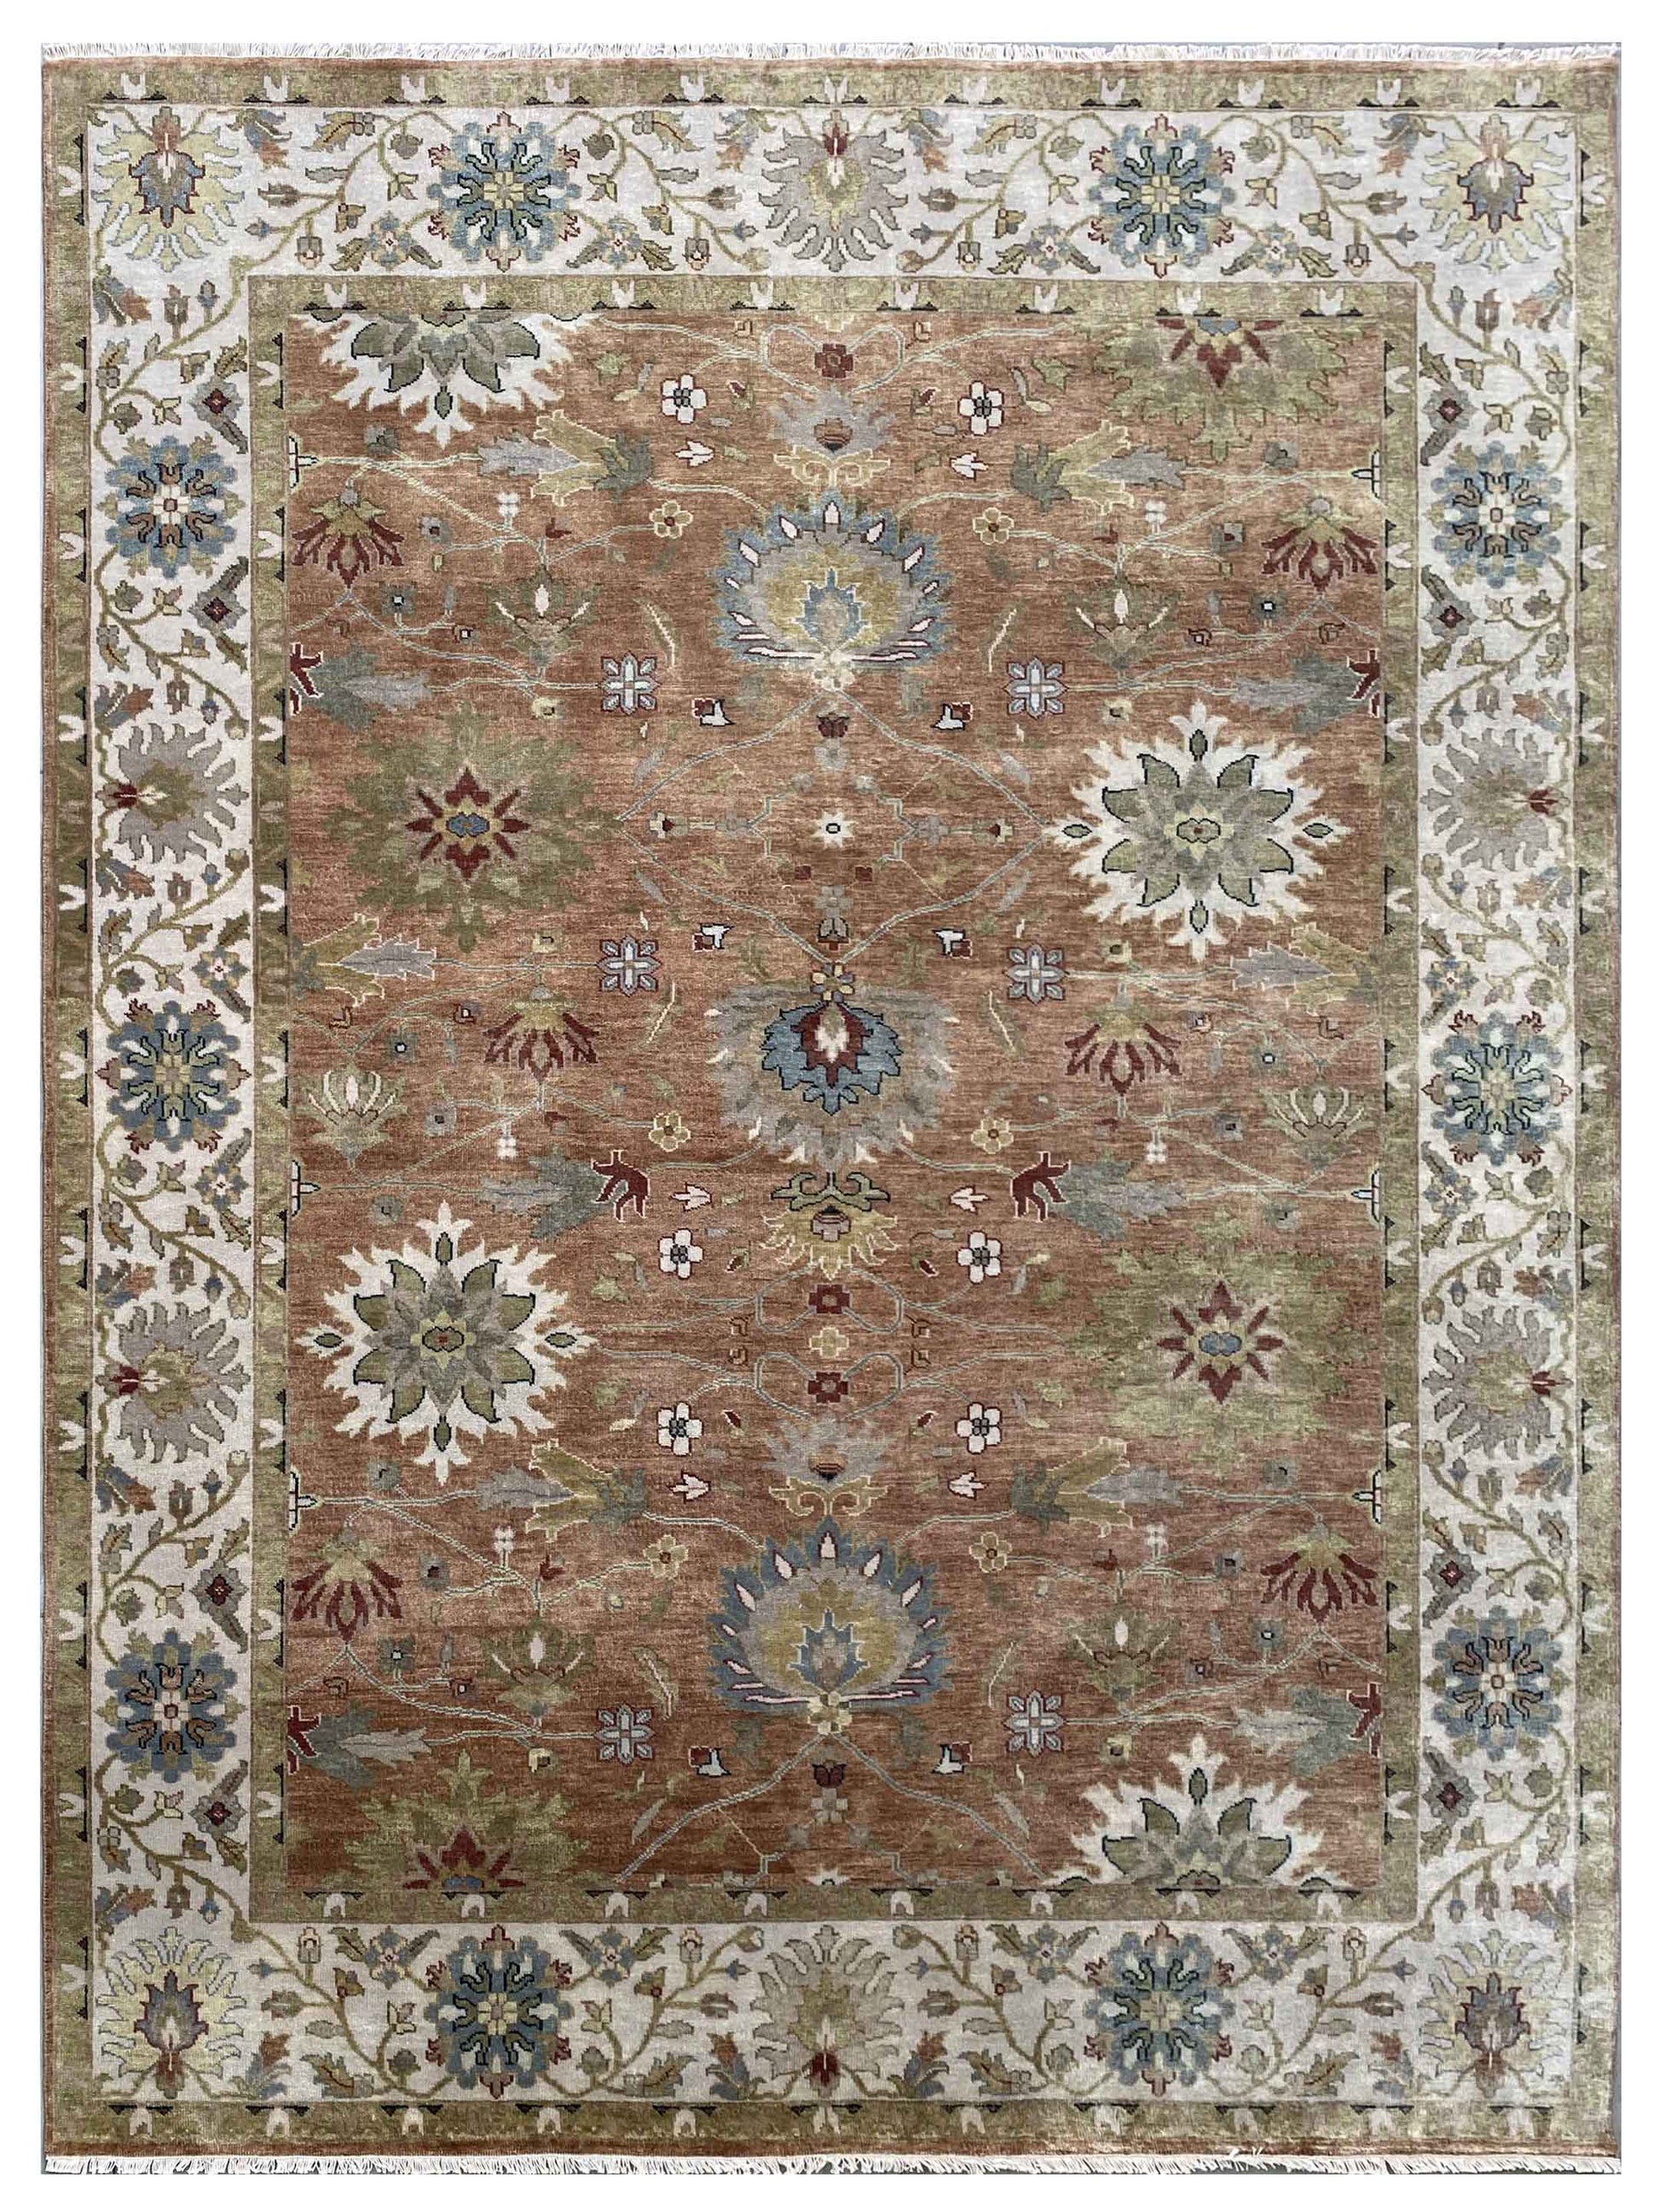 Artisan Cameron CB-206 Rust Traditional Knotted Rug